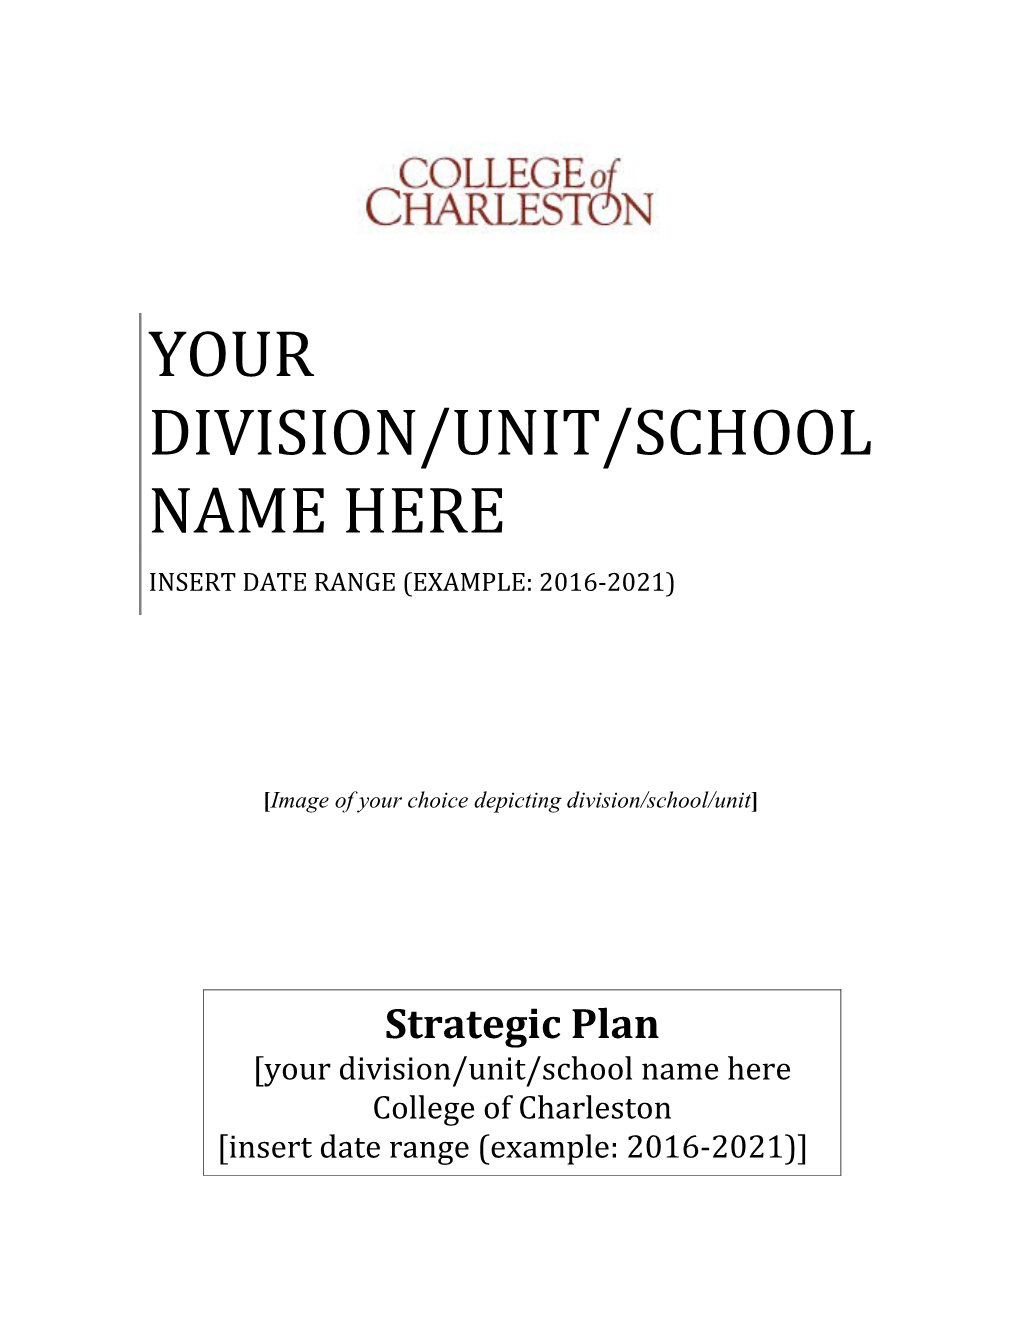 Your Division/Unit/School Name Here